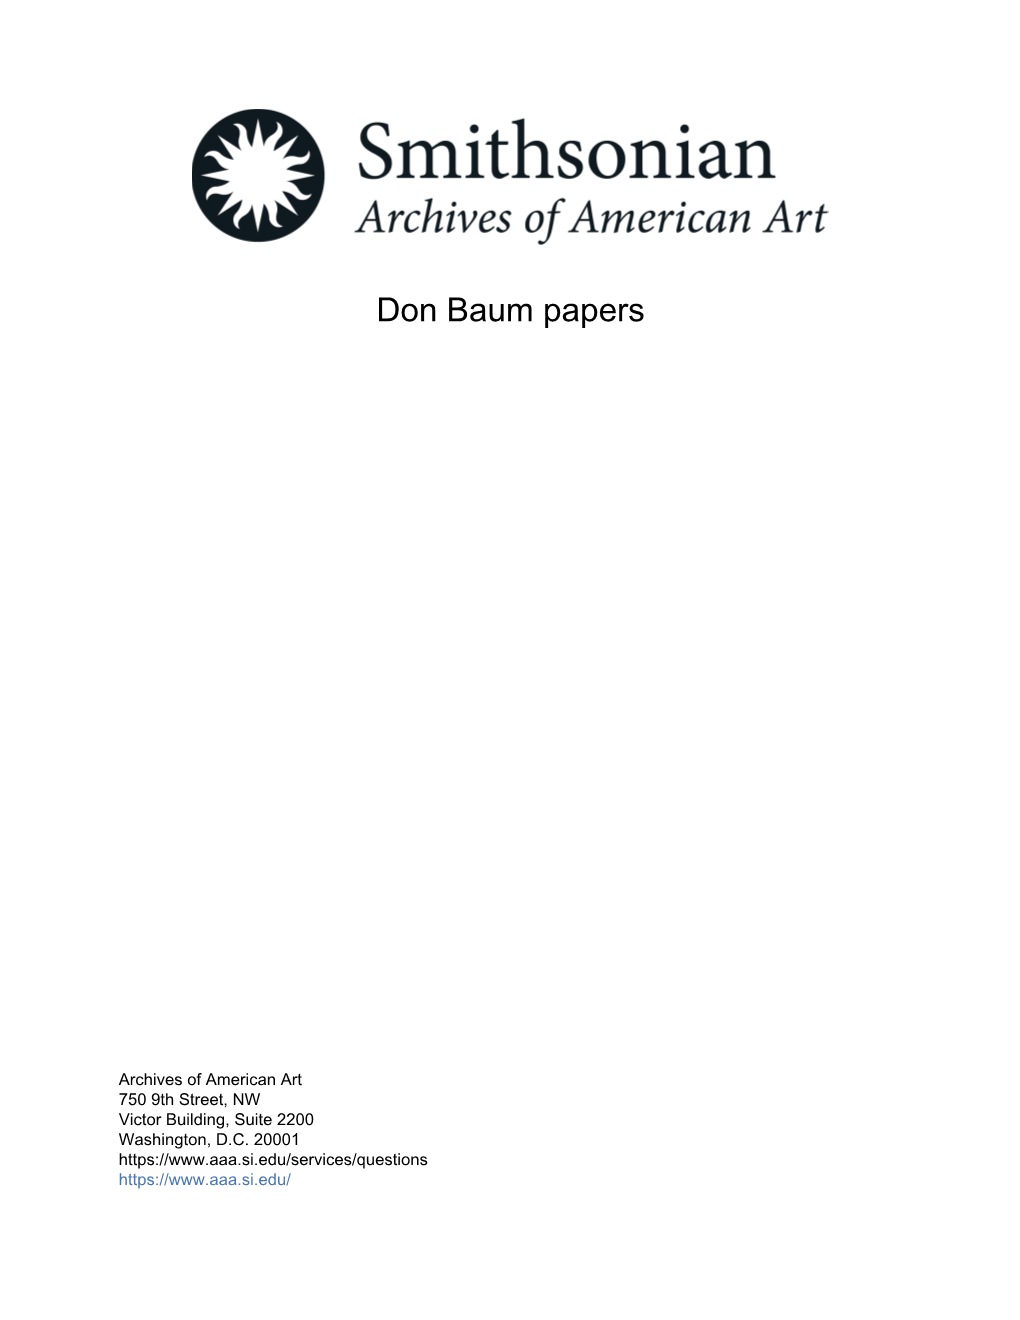 Don Baum Papers